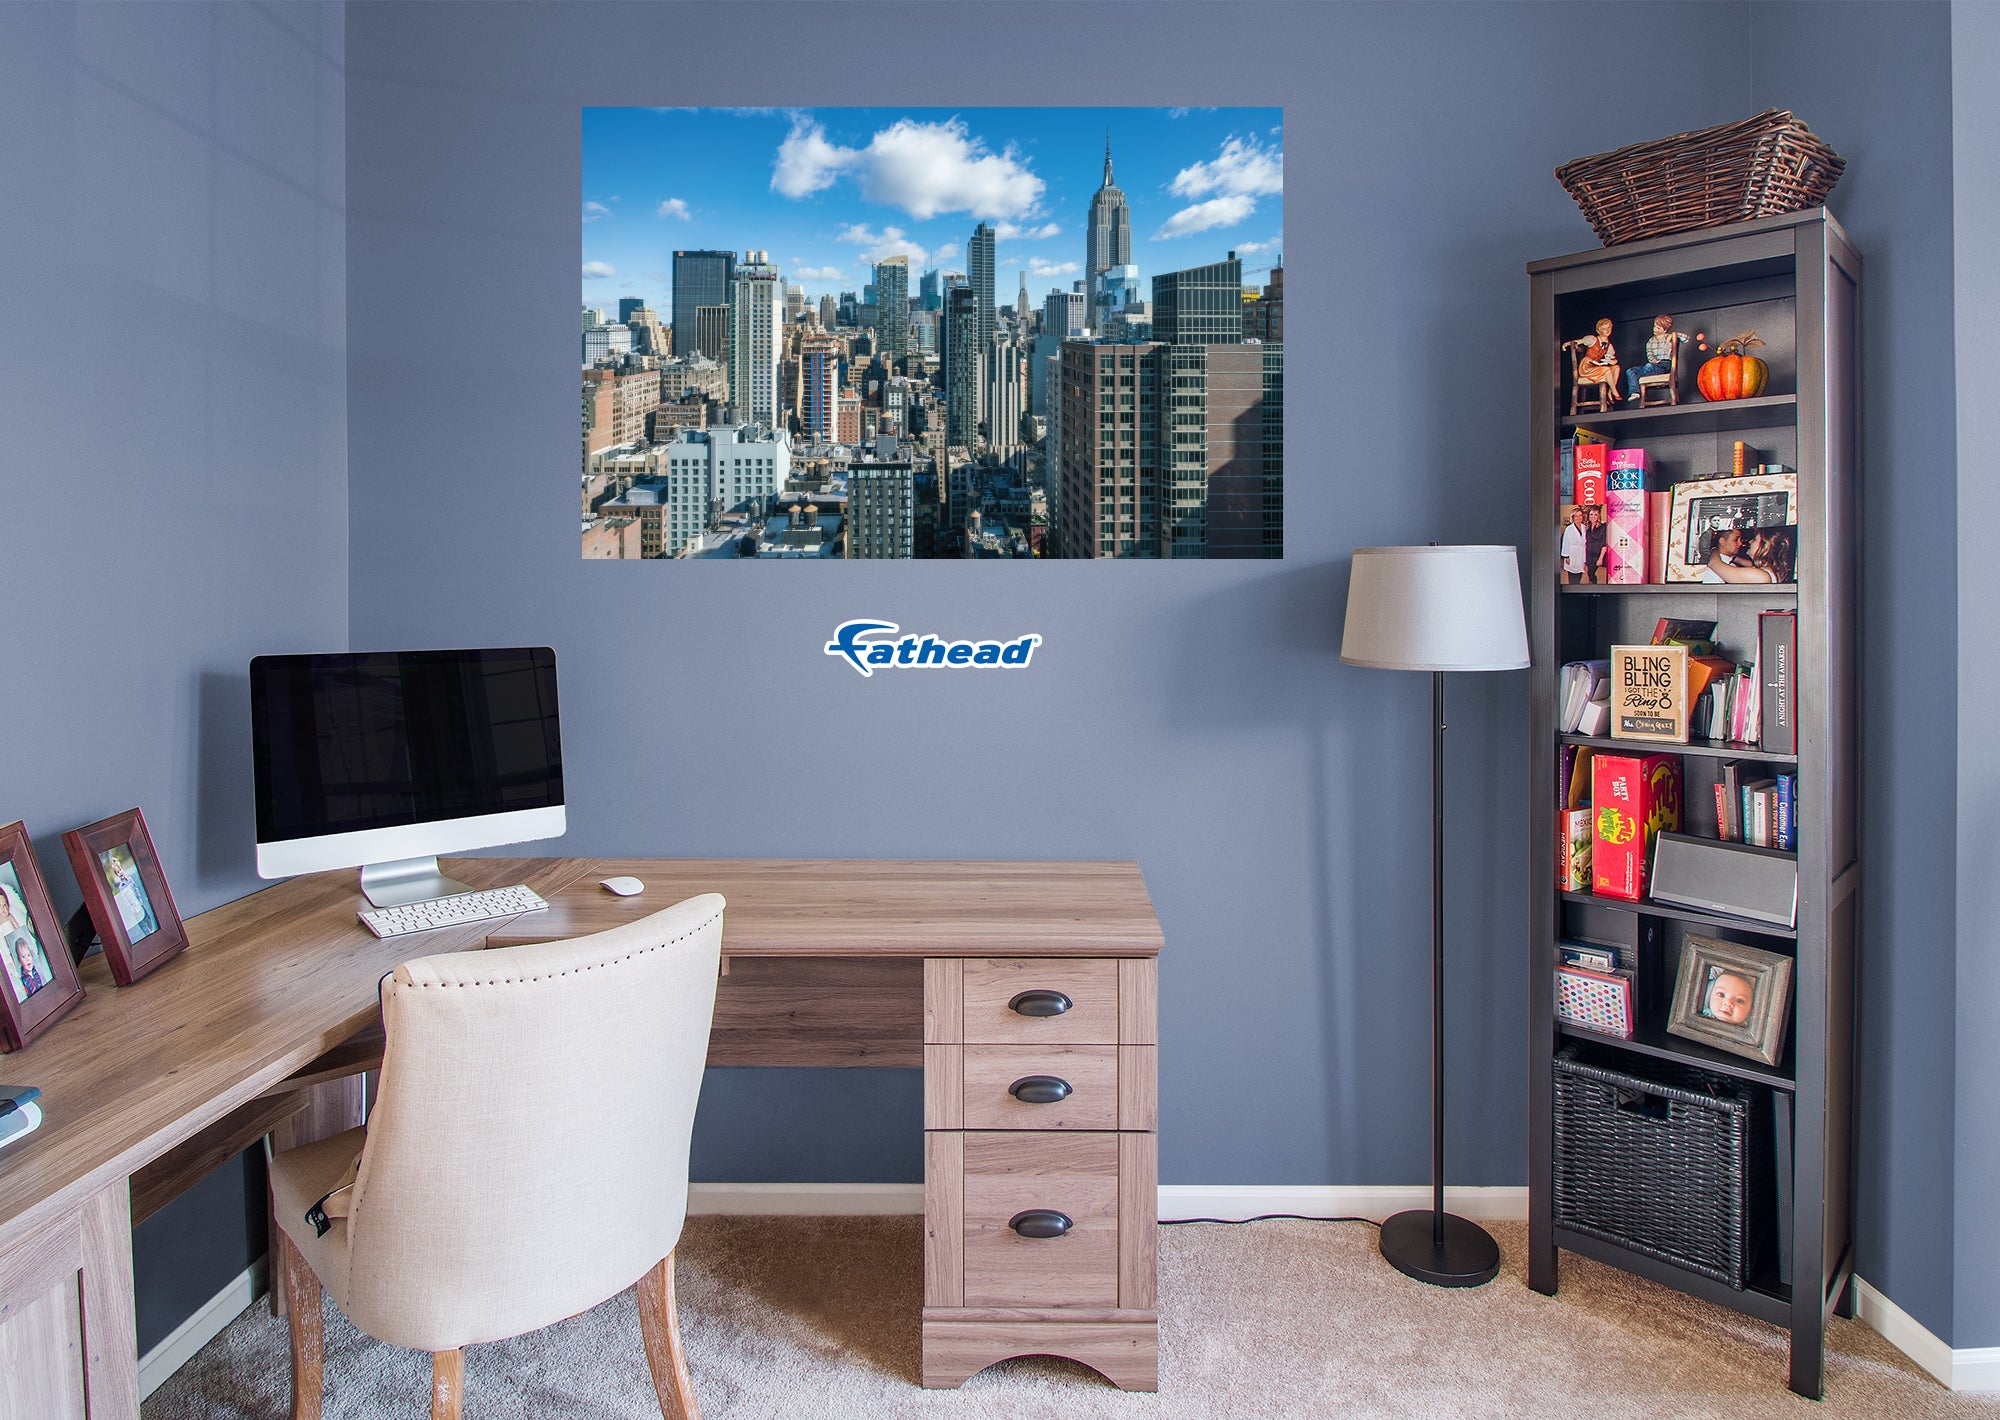 Generic Scenery: Skyscrapers Poster        -   Removable     Adhesive Decal